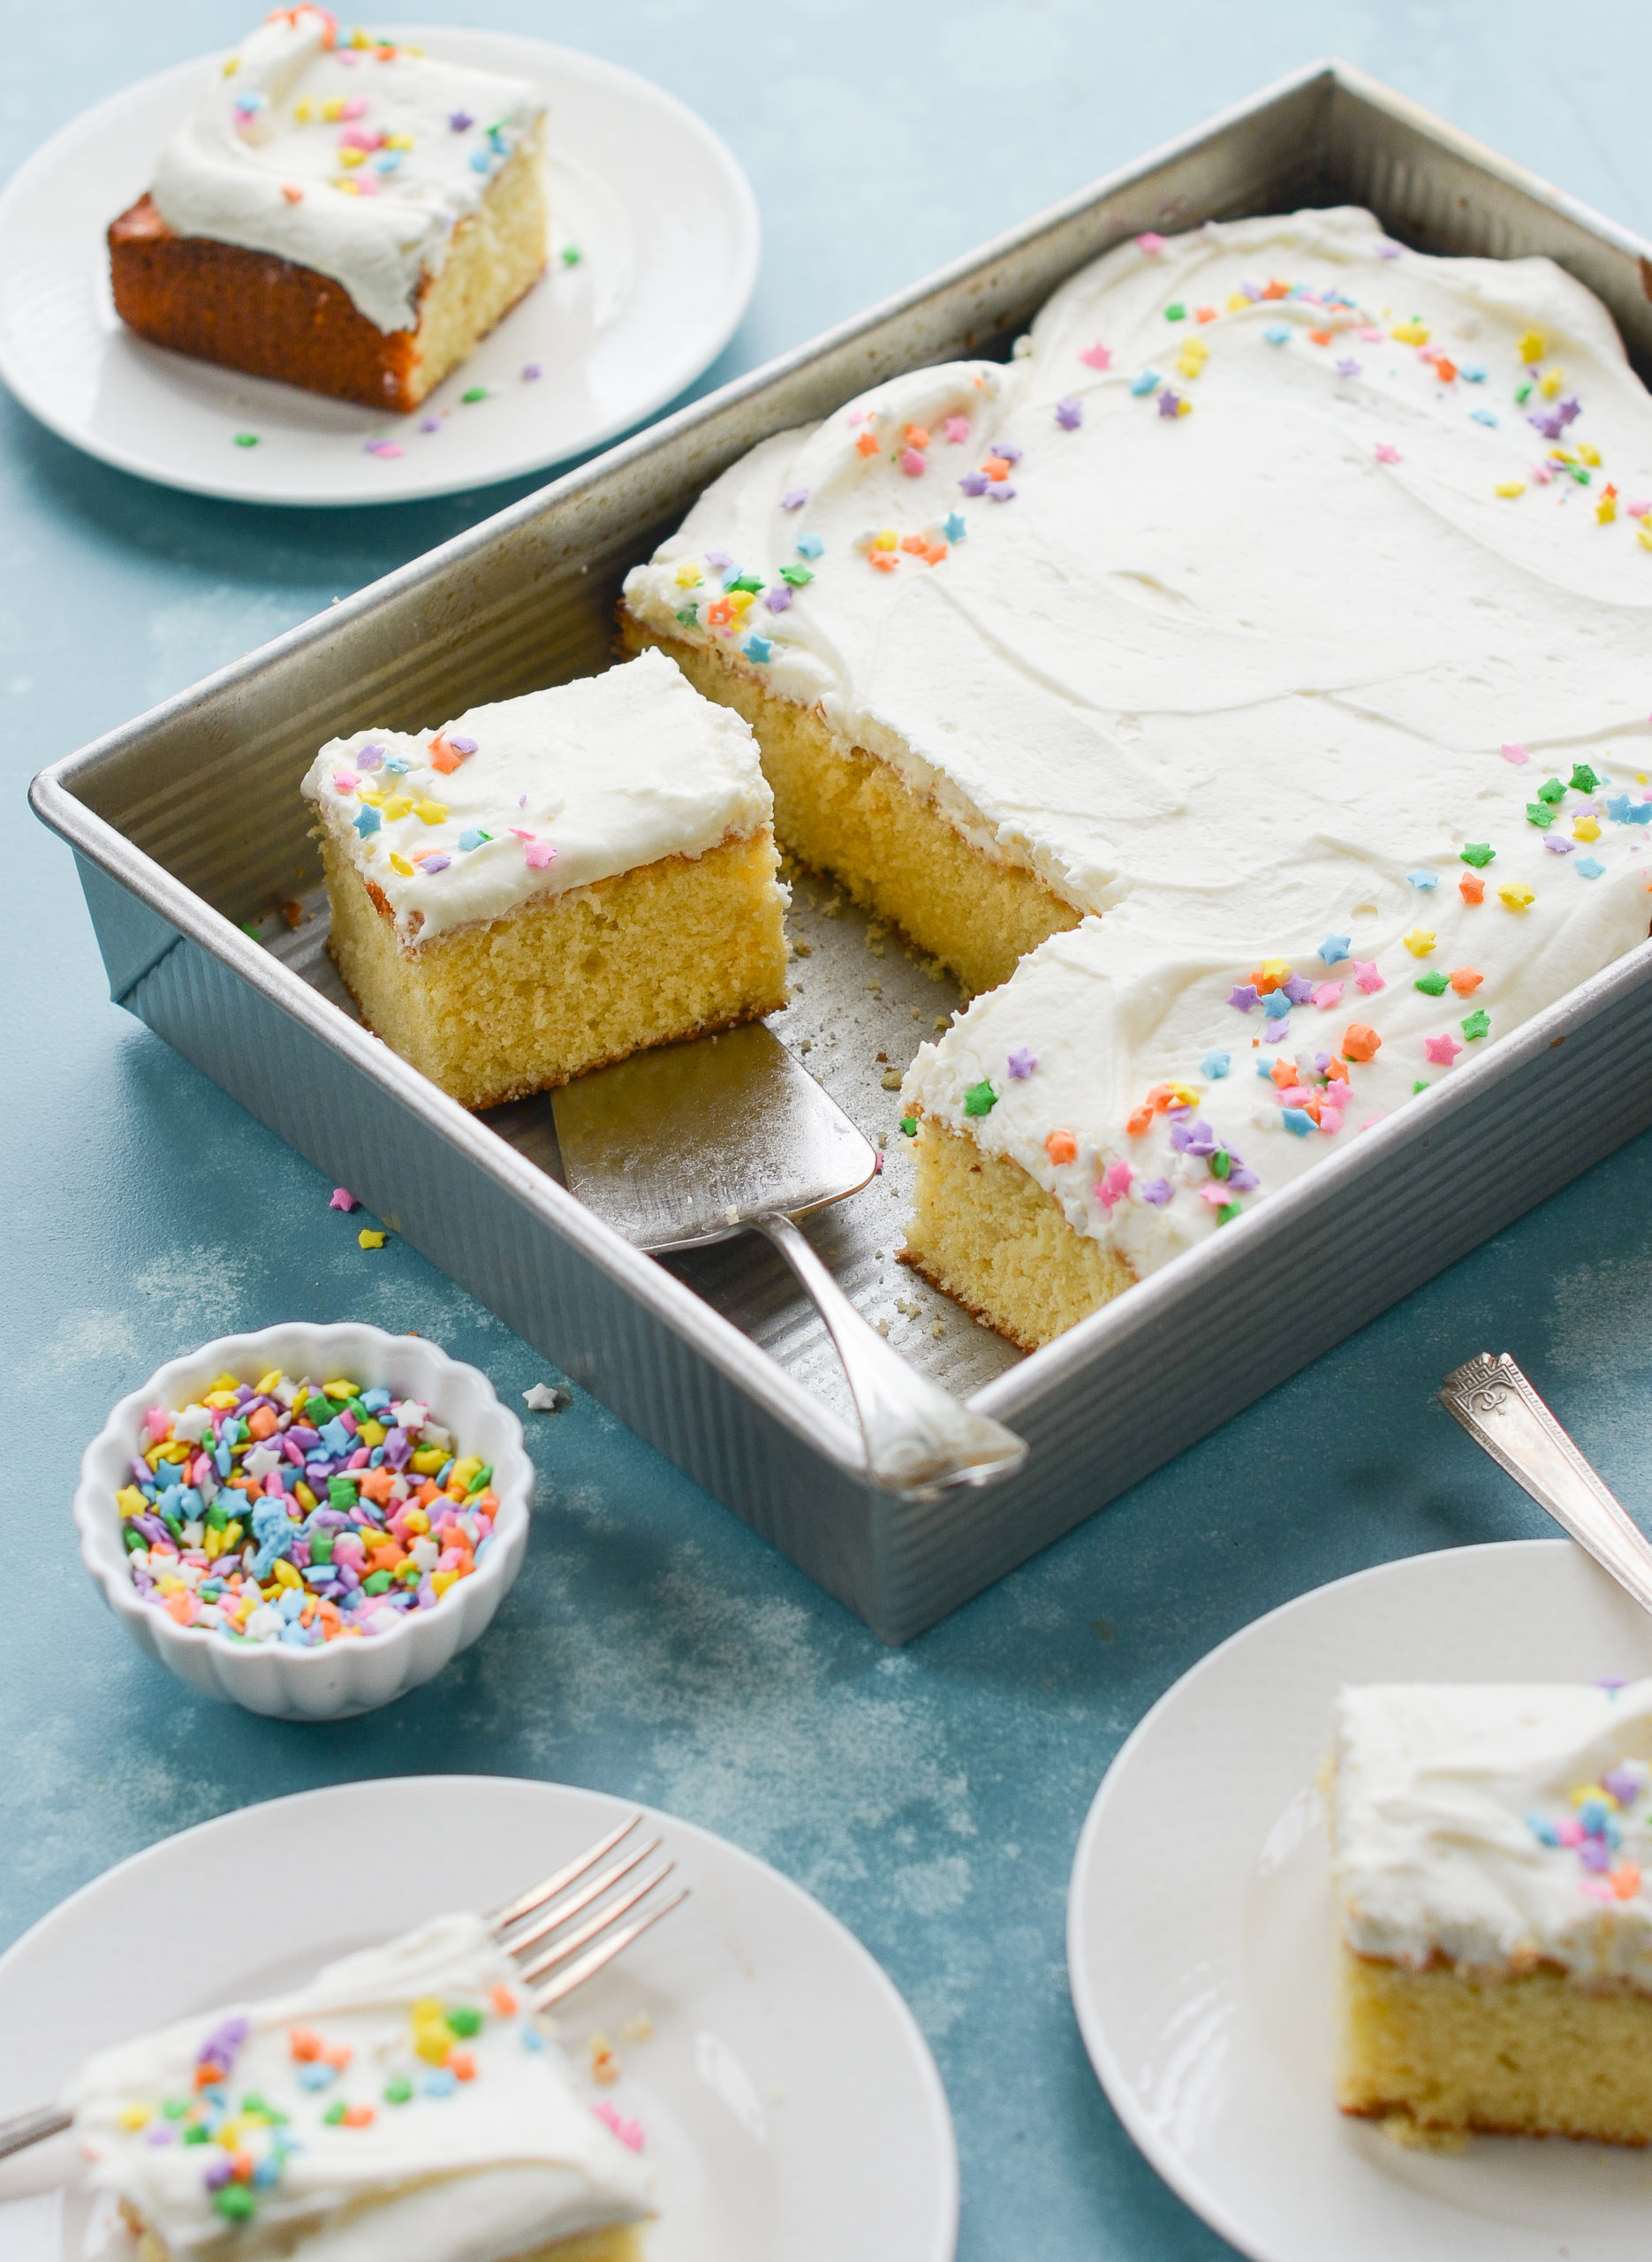 https://www.onceuponachef.com/images/2021/06/vanilla-sheet-cake-with-cream-cheese-frosting-scaled.jpg